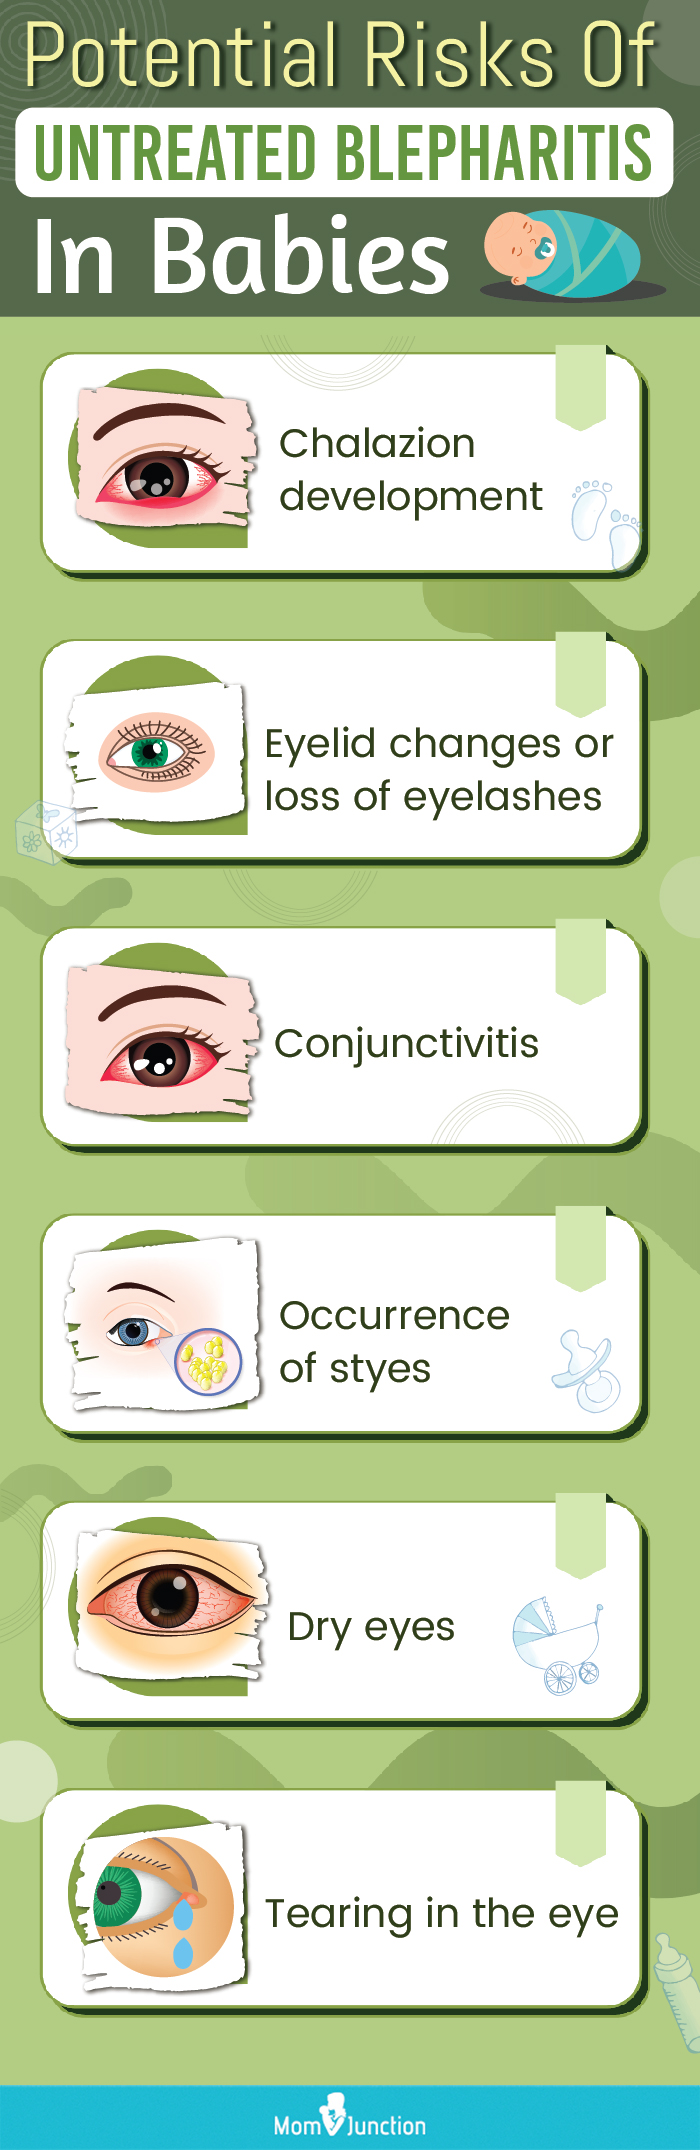 consequences of blepharitis in infants [infographic]